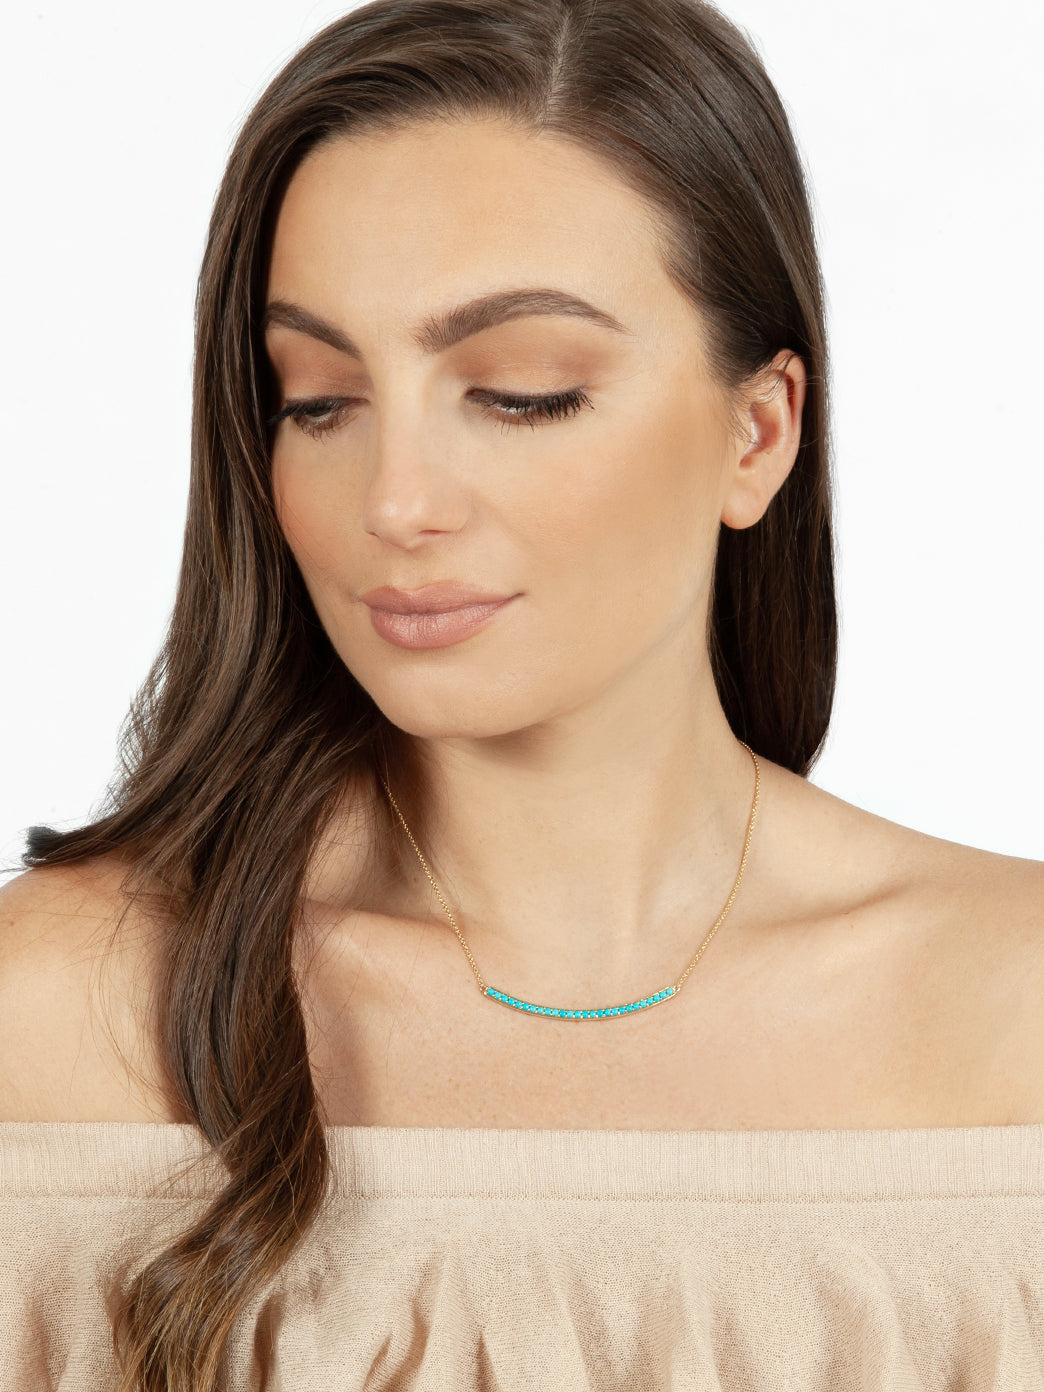 Fiorina Jewellery Arc Necklace Gold Turquoise Model